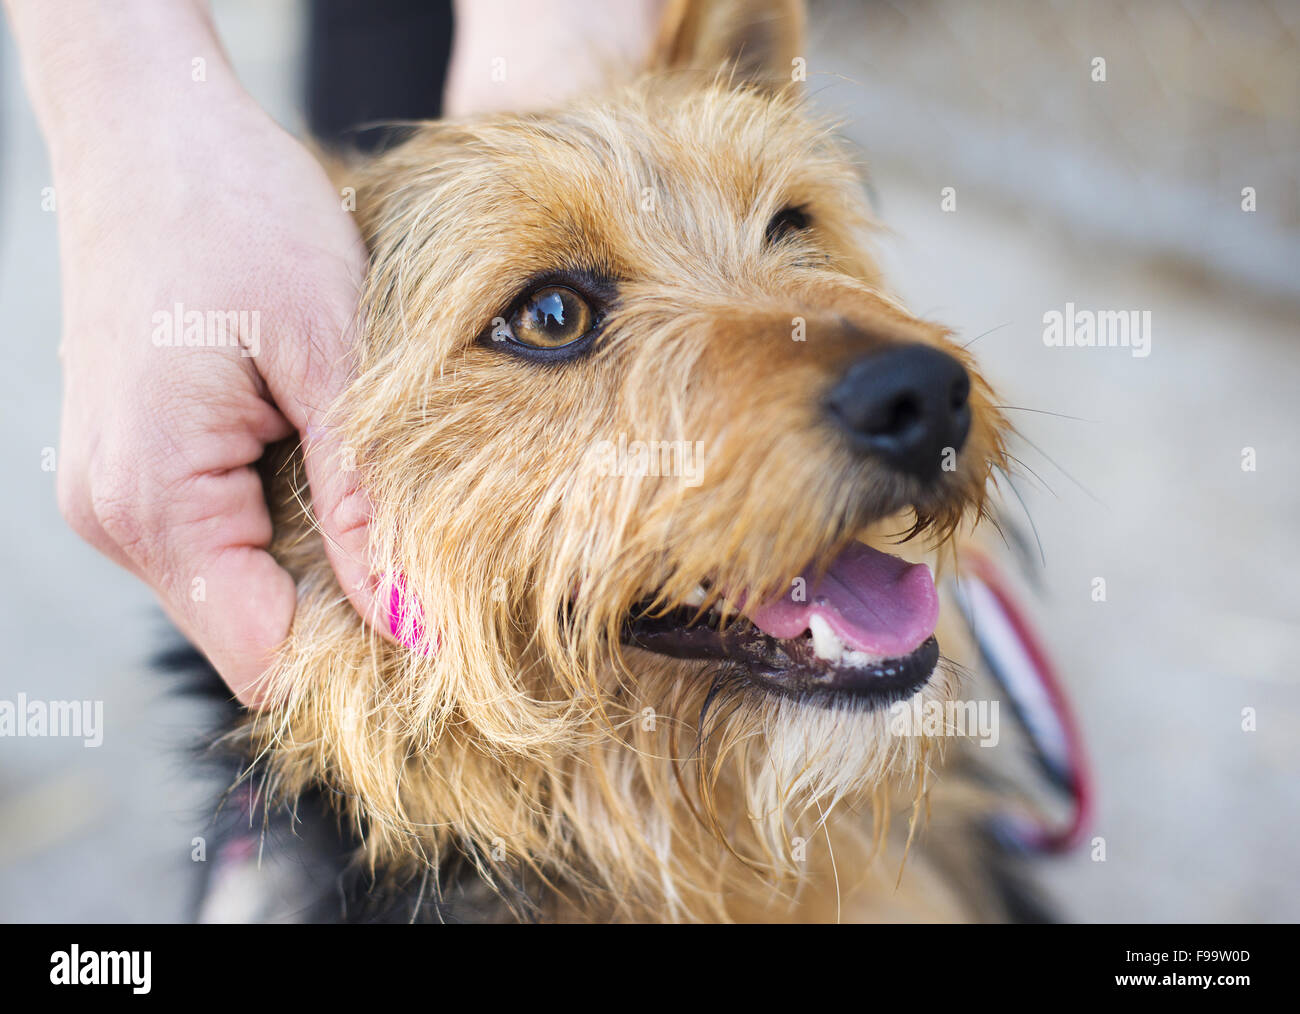 Female hand patting smiling brown dog head Stock Photo